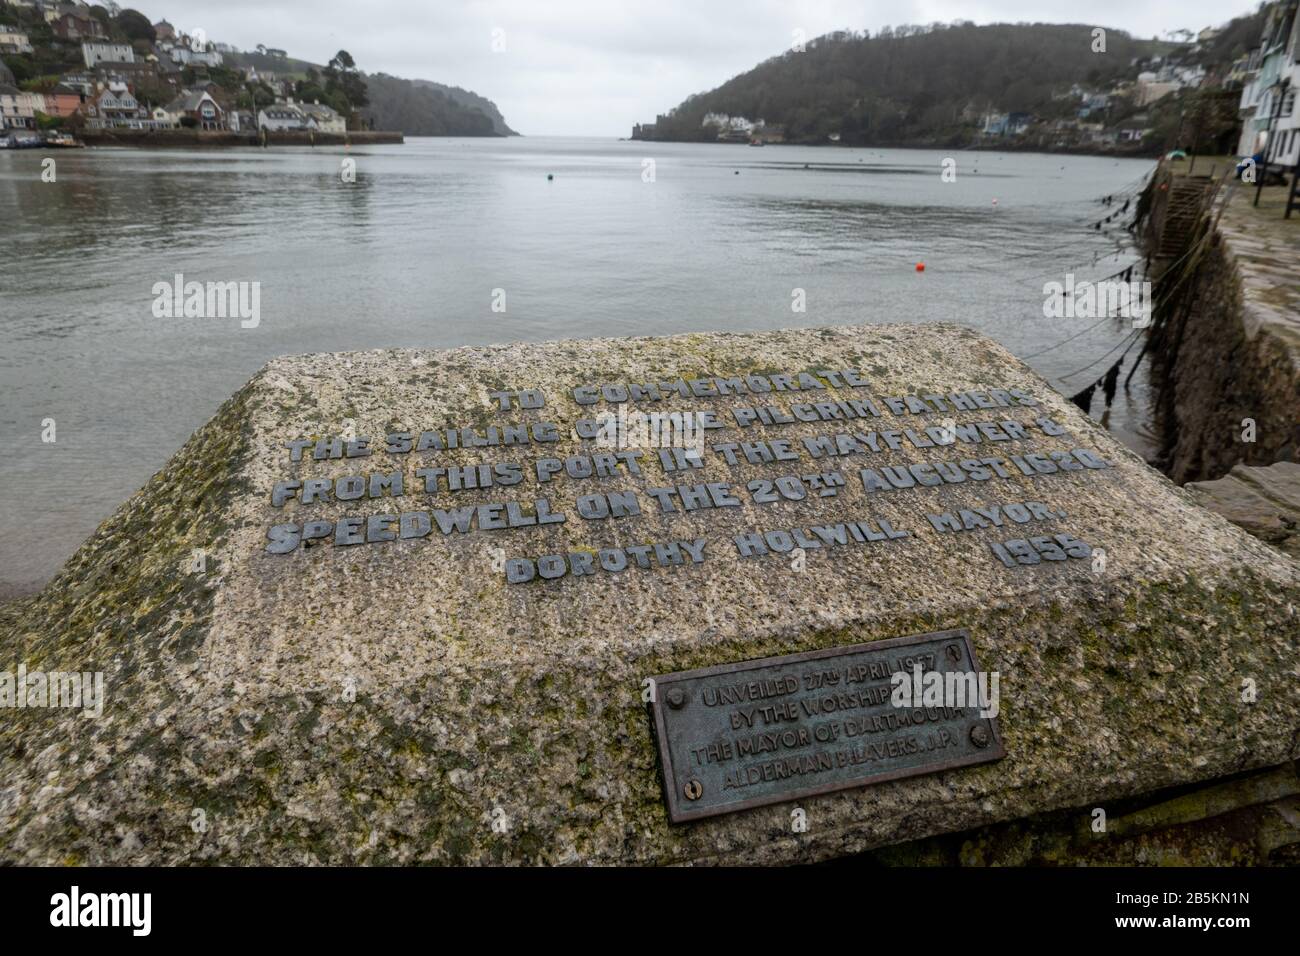 Memorial to commemorate the sailing of the Pilgrim fathers on the  Speedwell and the Mayflower from Dartmouth to America, Dartmouth,Devon Stock Photo